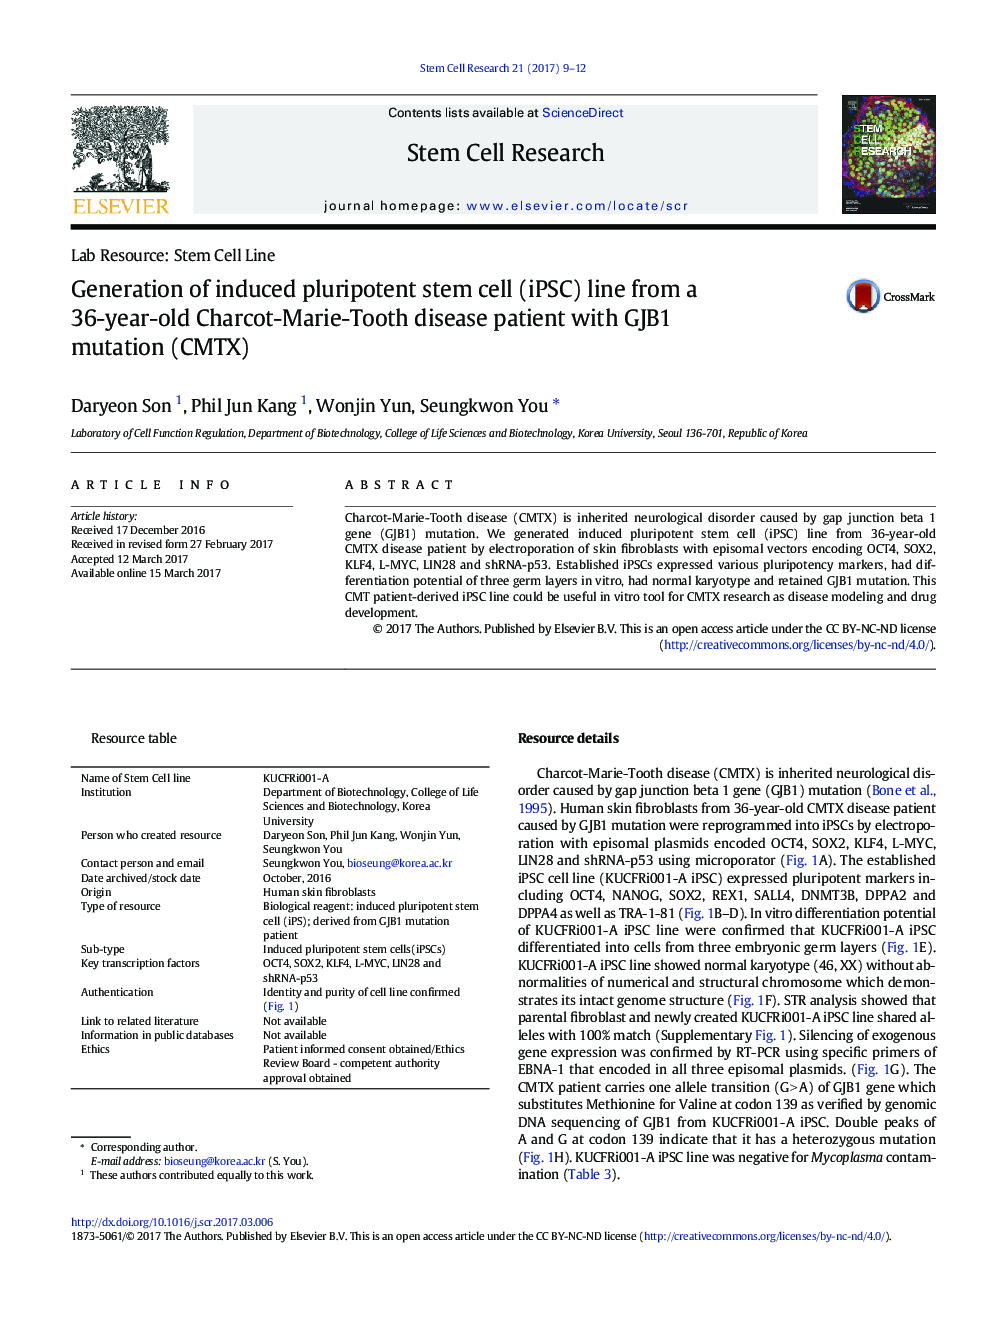 Generation of induced pluripotent stem cell (iPSC) line from a 36-year-old Charcot-Marie-Tooth disease patient with GJB1 mutation (CMTX)